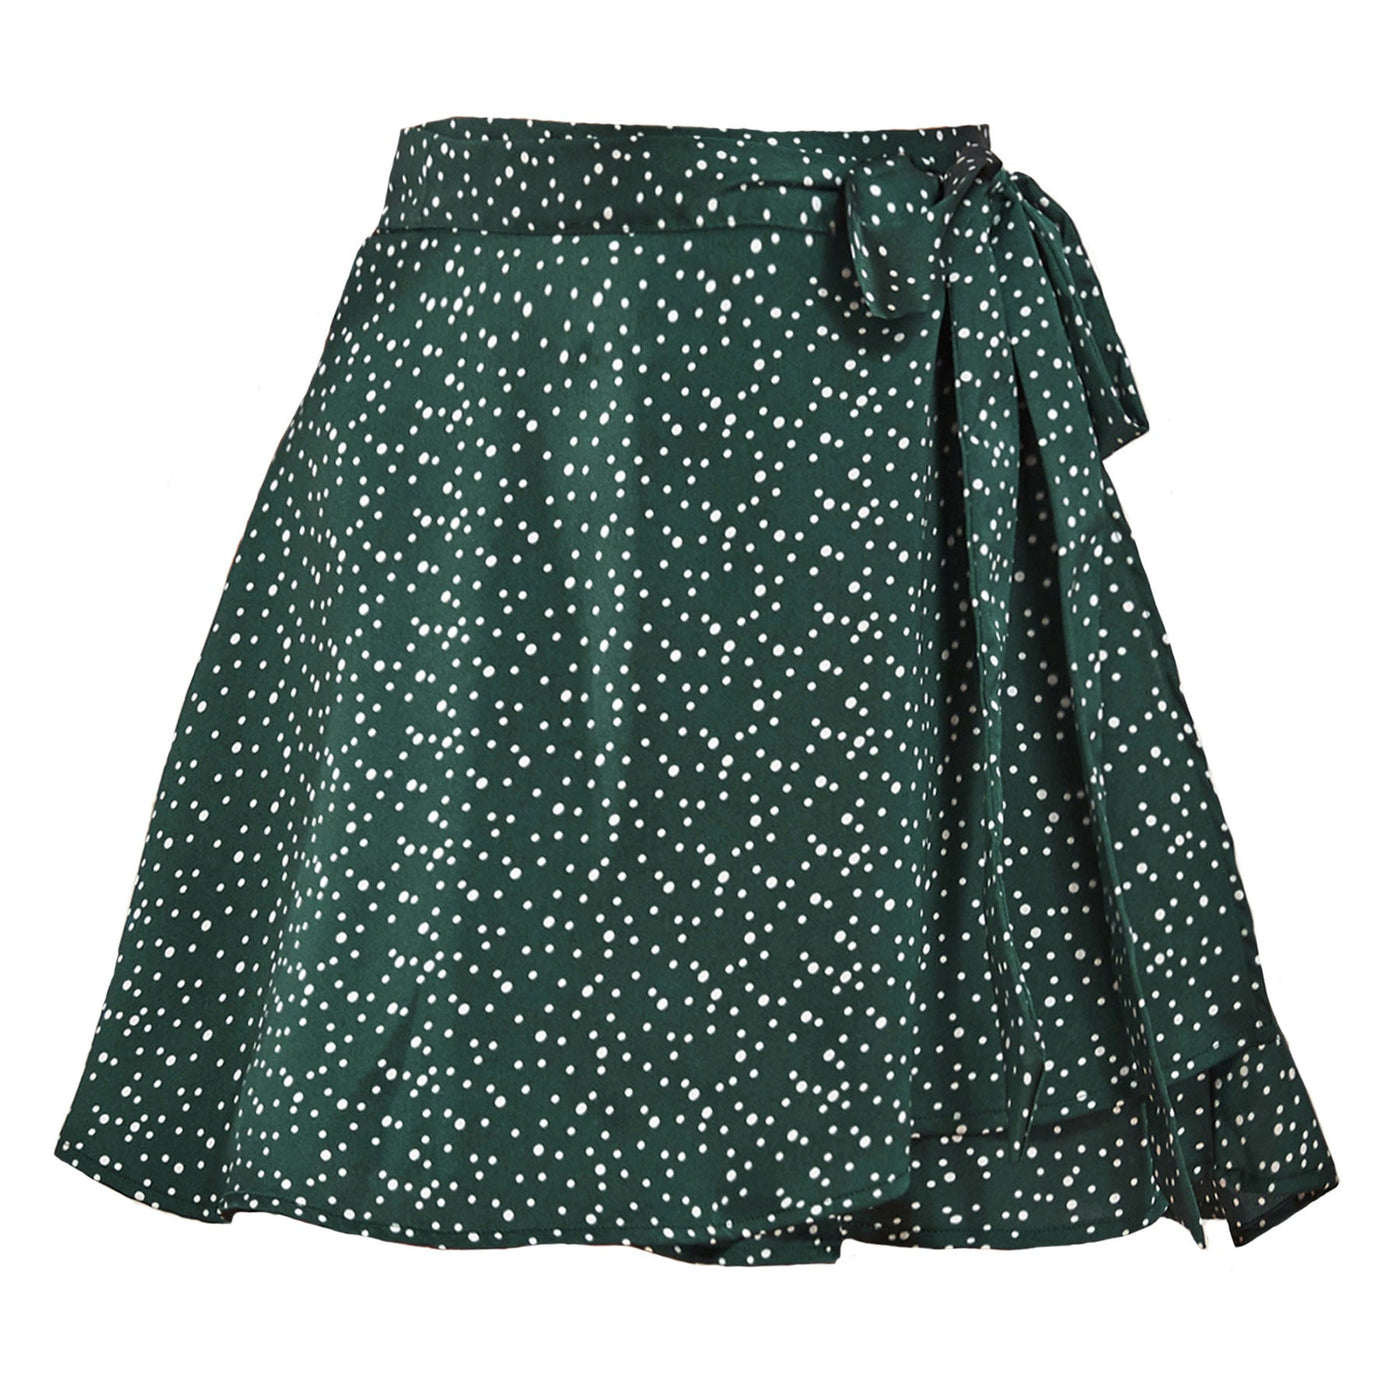 NTG Fad Green Dot / S High Waist Lace-Up Loose Casual Chiffon Satin Mini Skirt Solid Color Elegant Skirts